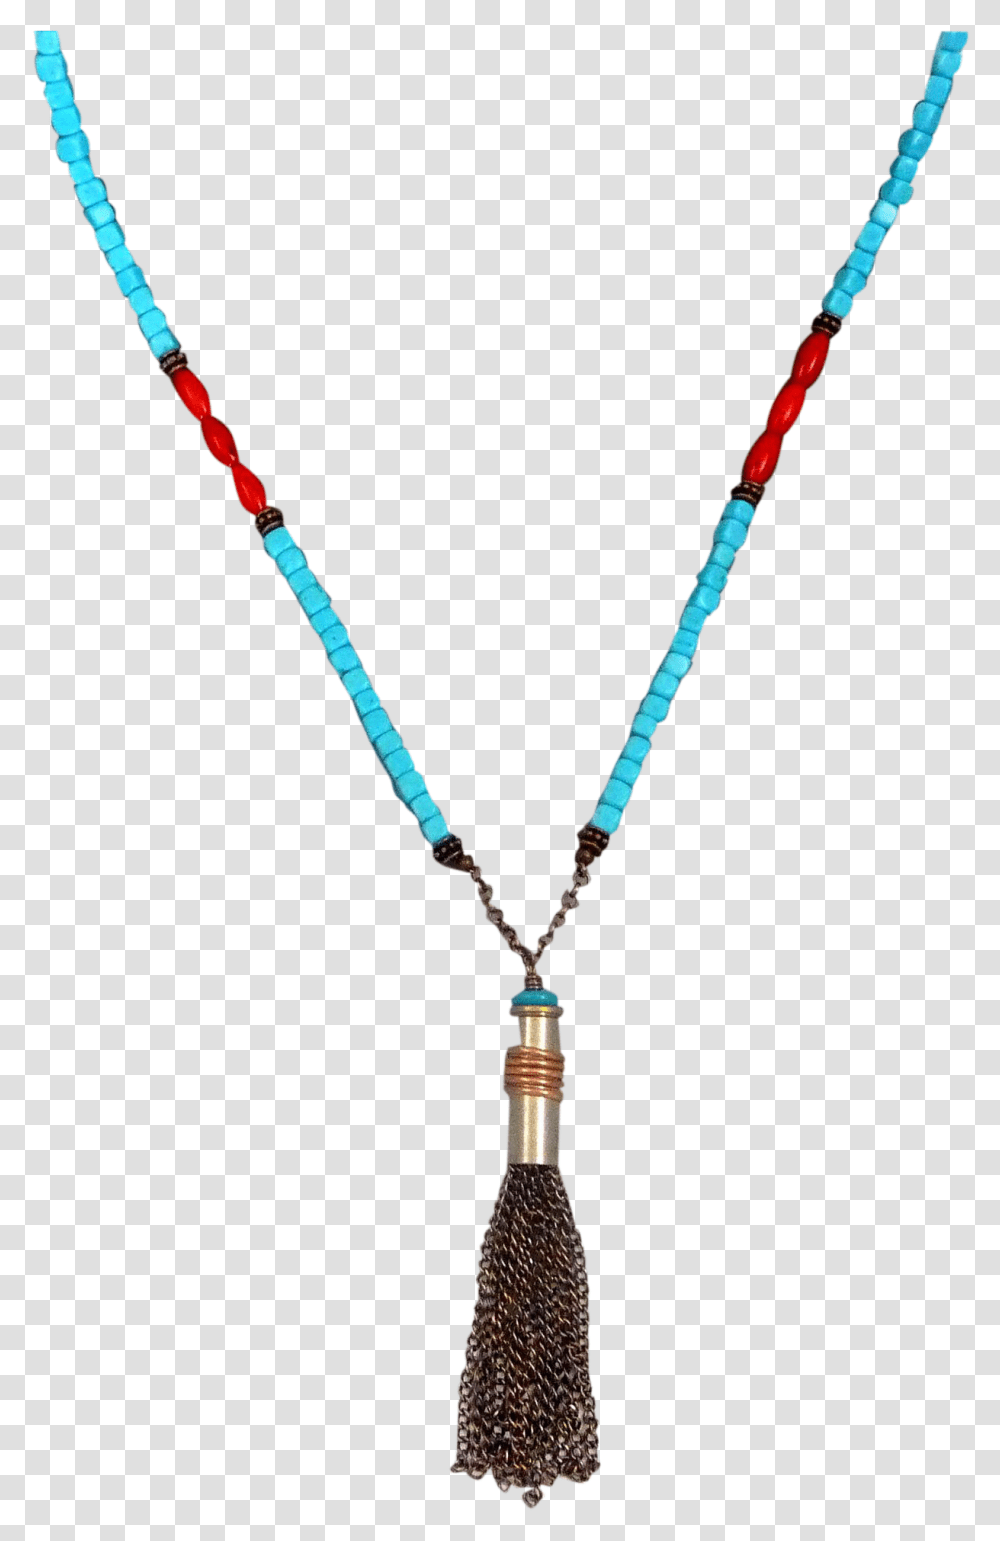 Bullet Casing Necklace, Jewelry, Accessories, Accessory, Pendant Transparent Png